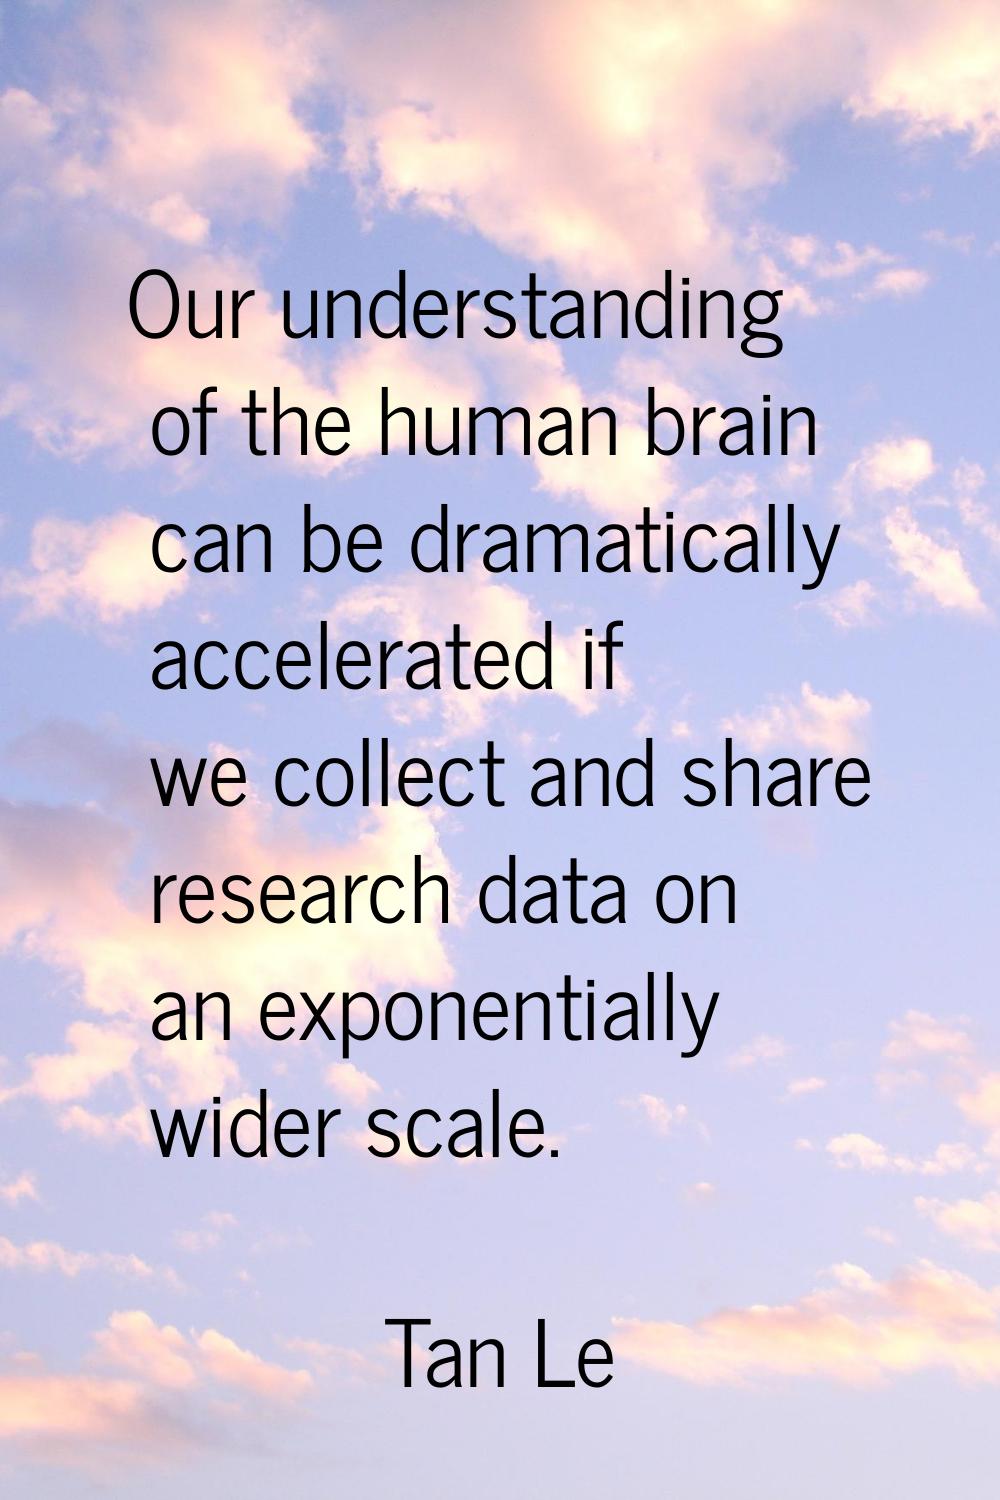 Our understanding of the human brain can be dramatically accelerated if we collect and share resear